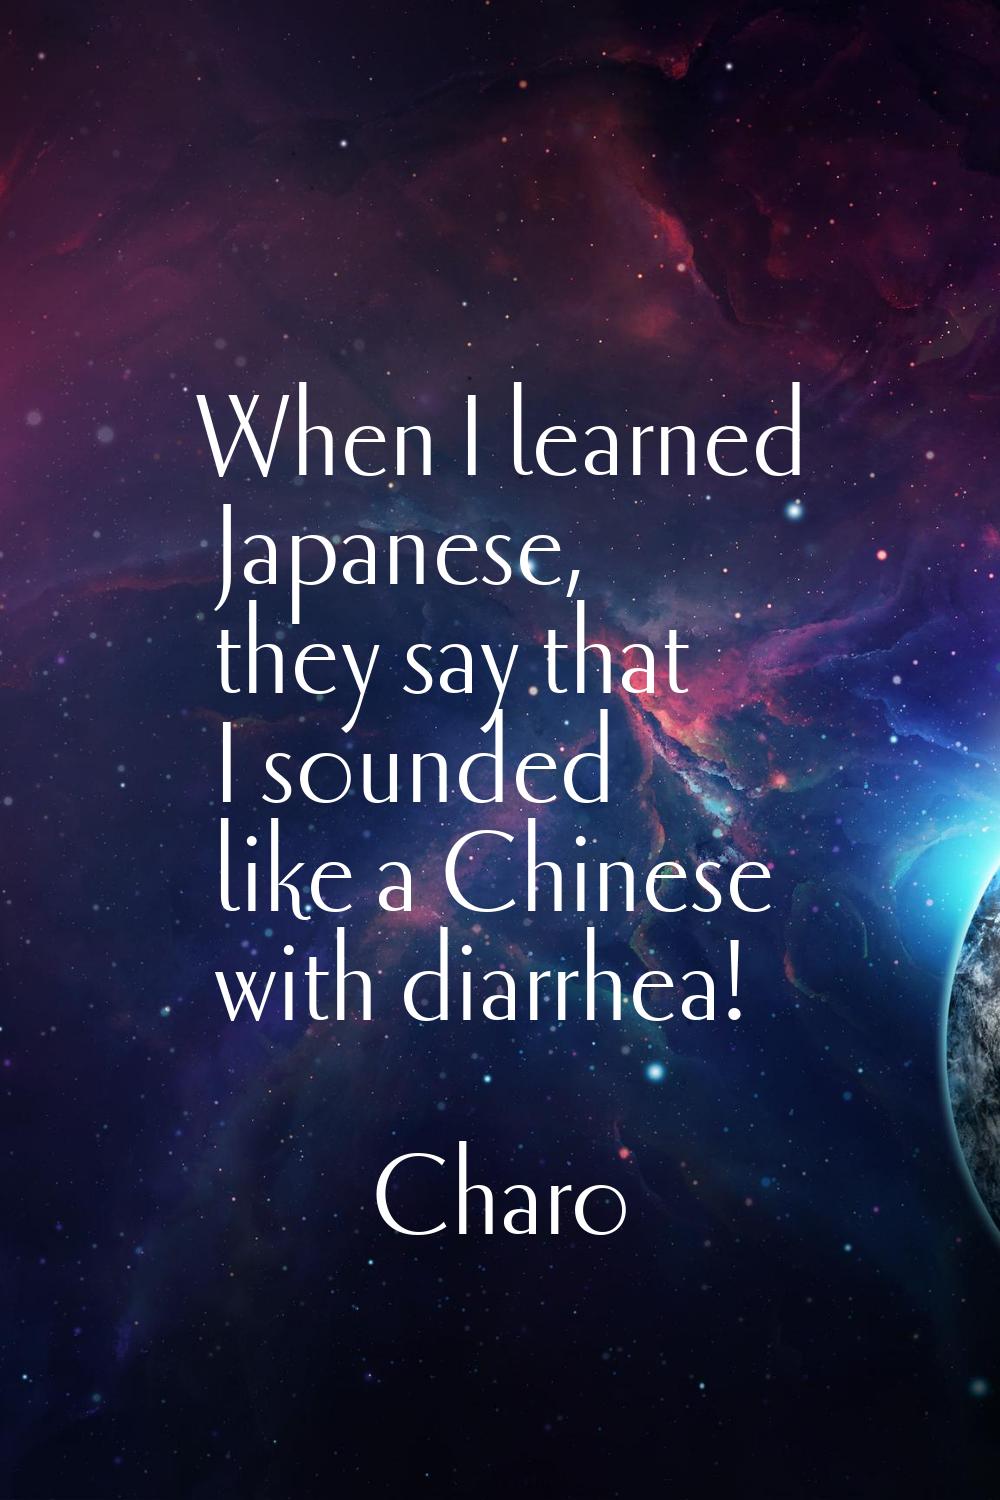 When I learned Japanese, they say that I sounded like a Chinese with diarrhea!